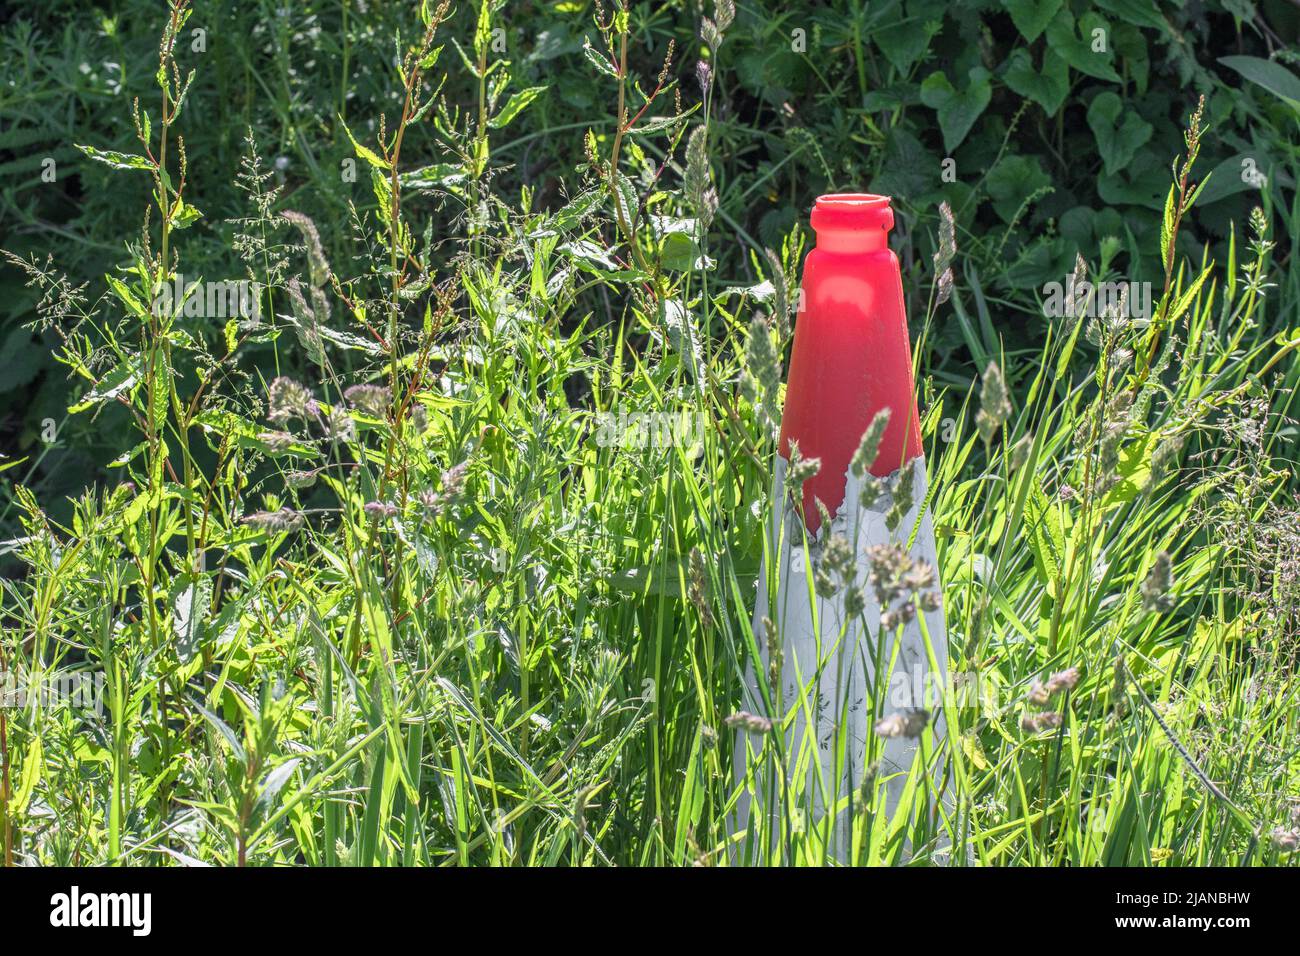 Orange and white road cone engulfed by weeds and grass on country roadside verge. Metaphor roadworks, men at work, traffic delays, forgotten. Stock Photo